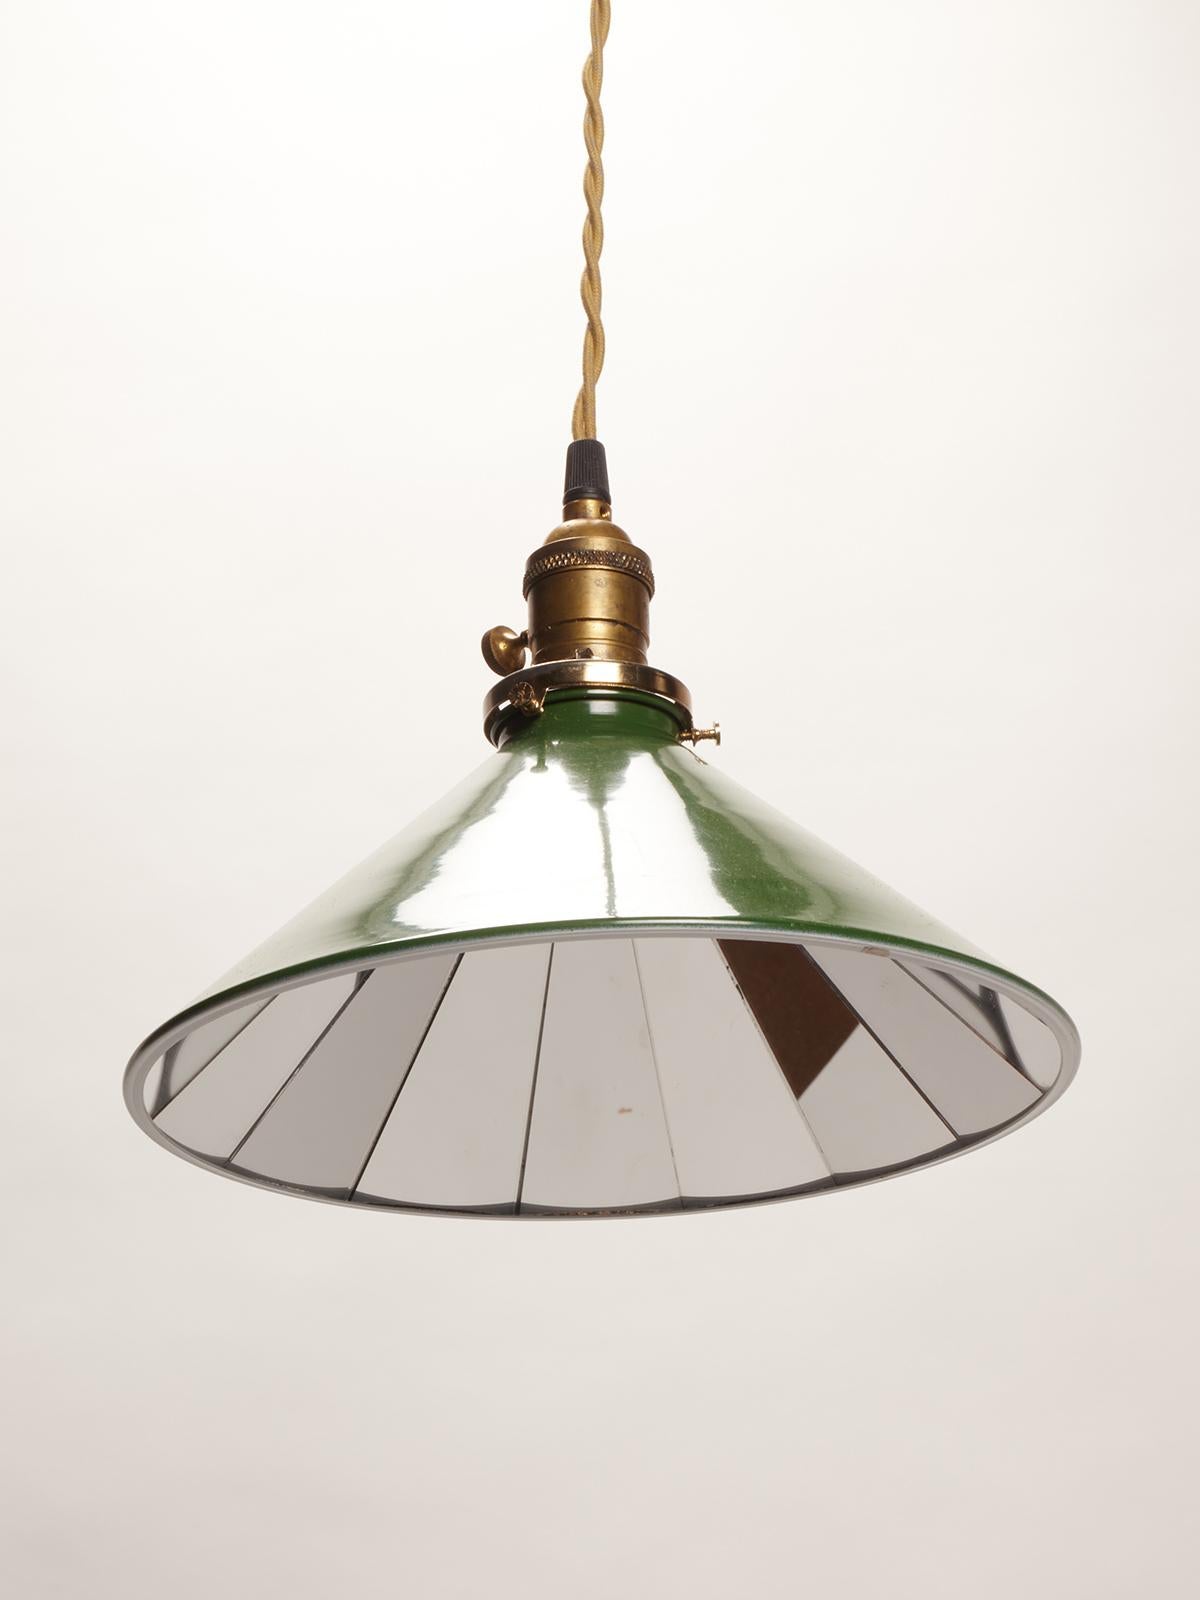 Green enameled metal swinging industrial lamps from a tailoring factory, made out of metal and mirrors, trapezium shape, to reflect the light. USA circa 1920.